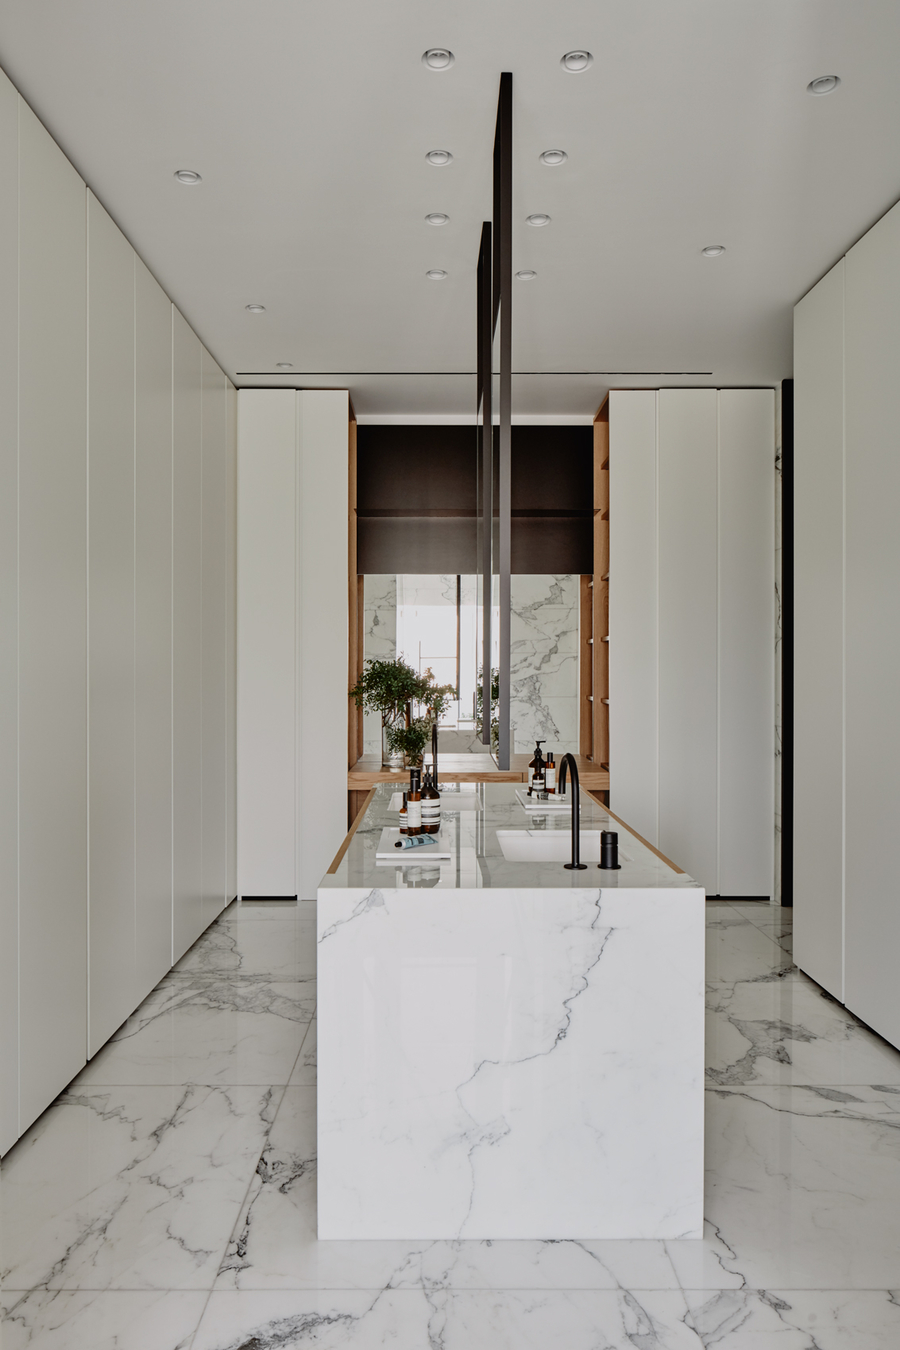 A modern kitchen with the floor made out of marble, so as the center counter. vshd design VSHD Design &#8211; Minimalist Interior Designs Inspirations Webp